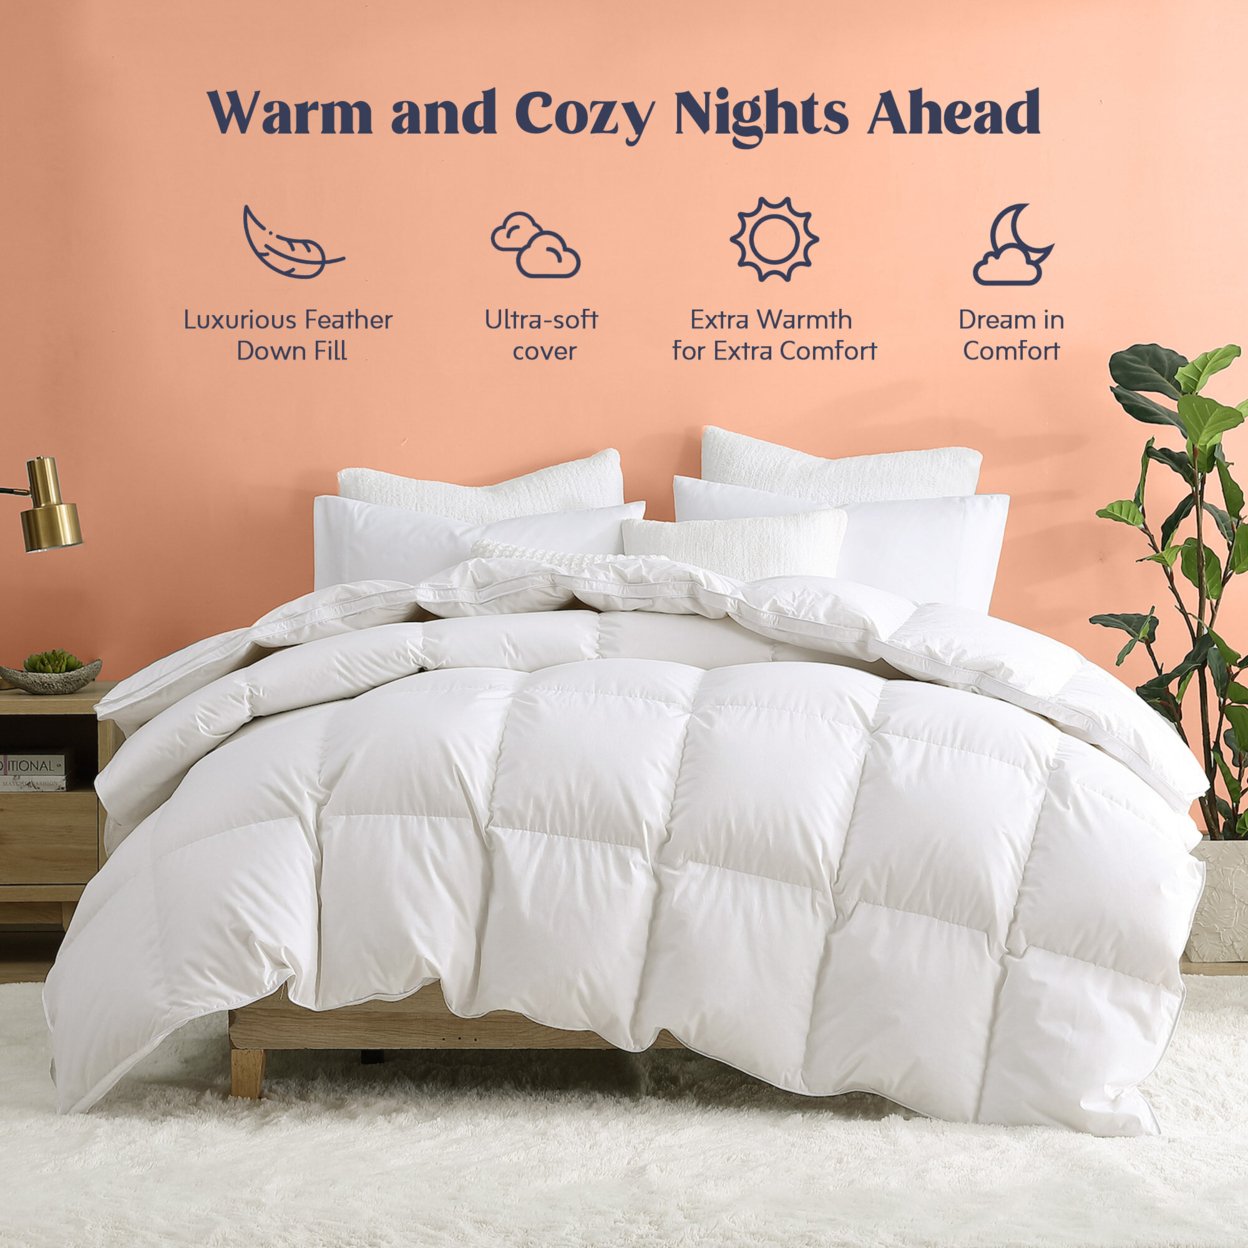 White Goose Down And Ultra Feather Comforter For Winter, Heavy Weight Comforter - Twin, White